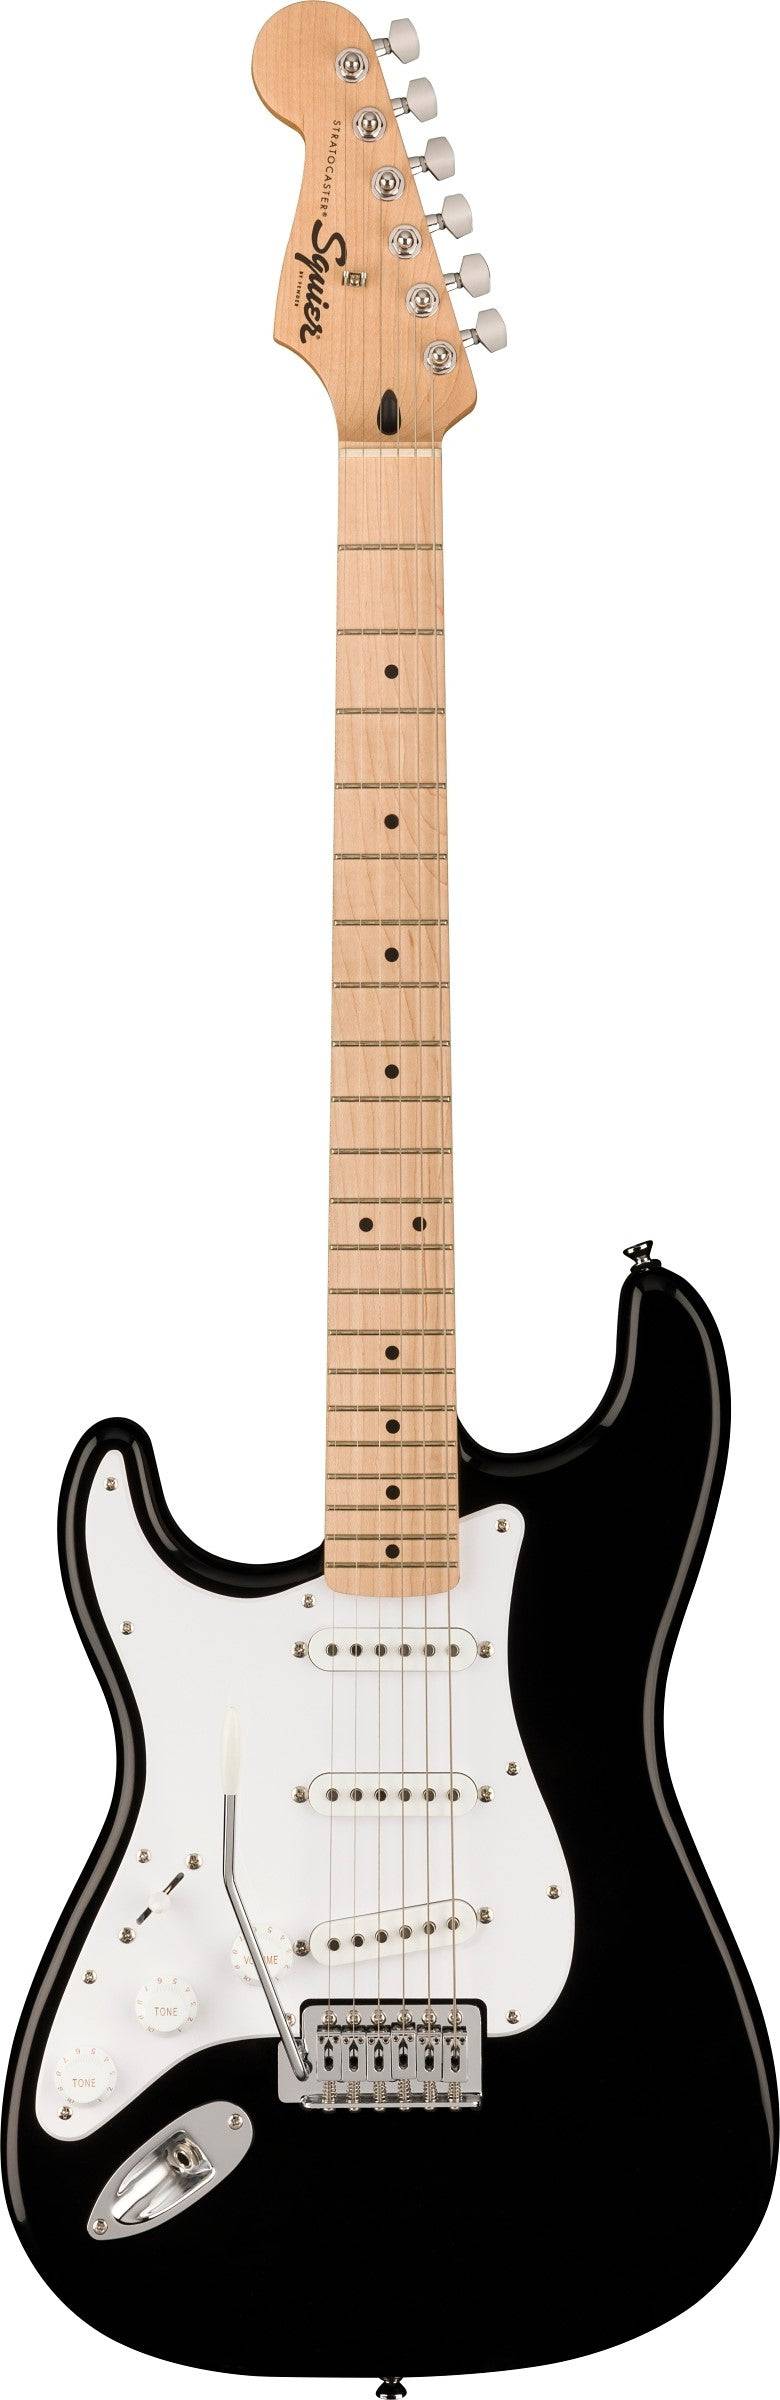 SQUIER SONIC STRATOCASTER LEFT-HANDED MN BLACK - Joondalup Music Centre